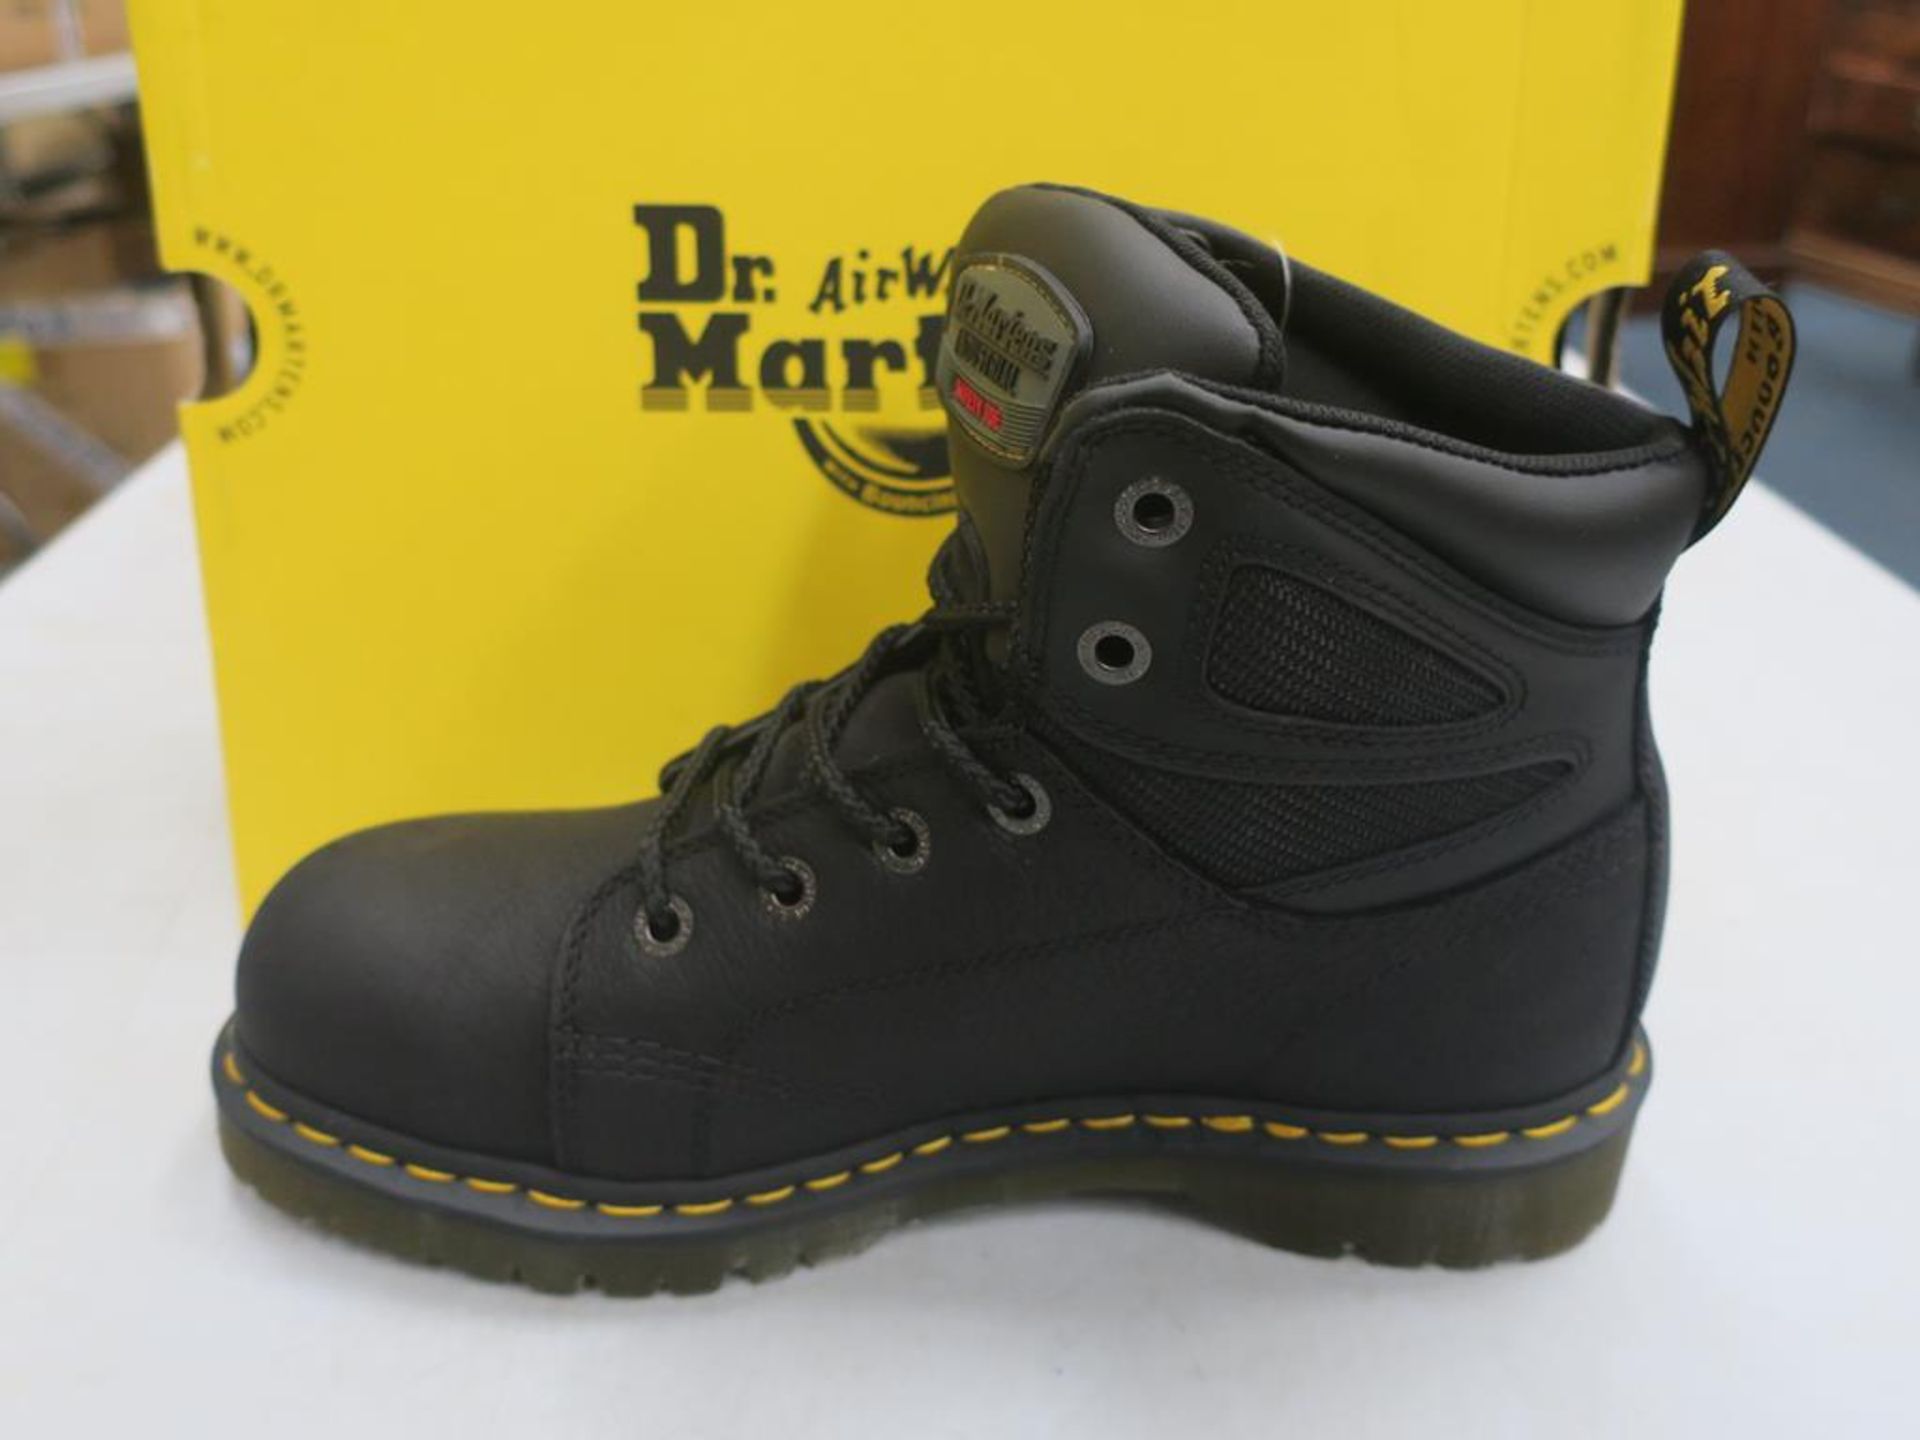 * A pair of New/Boxed Dr Martens Boots, Fairleigh ST, 21046001, Overlord in black, UK size 9 - Image 2 of 3